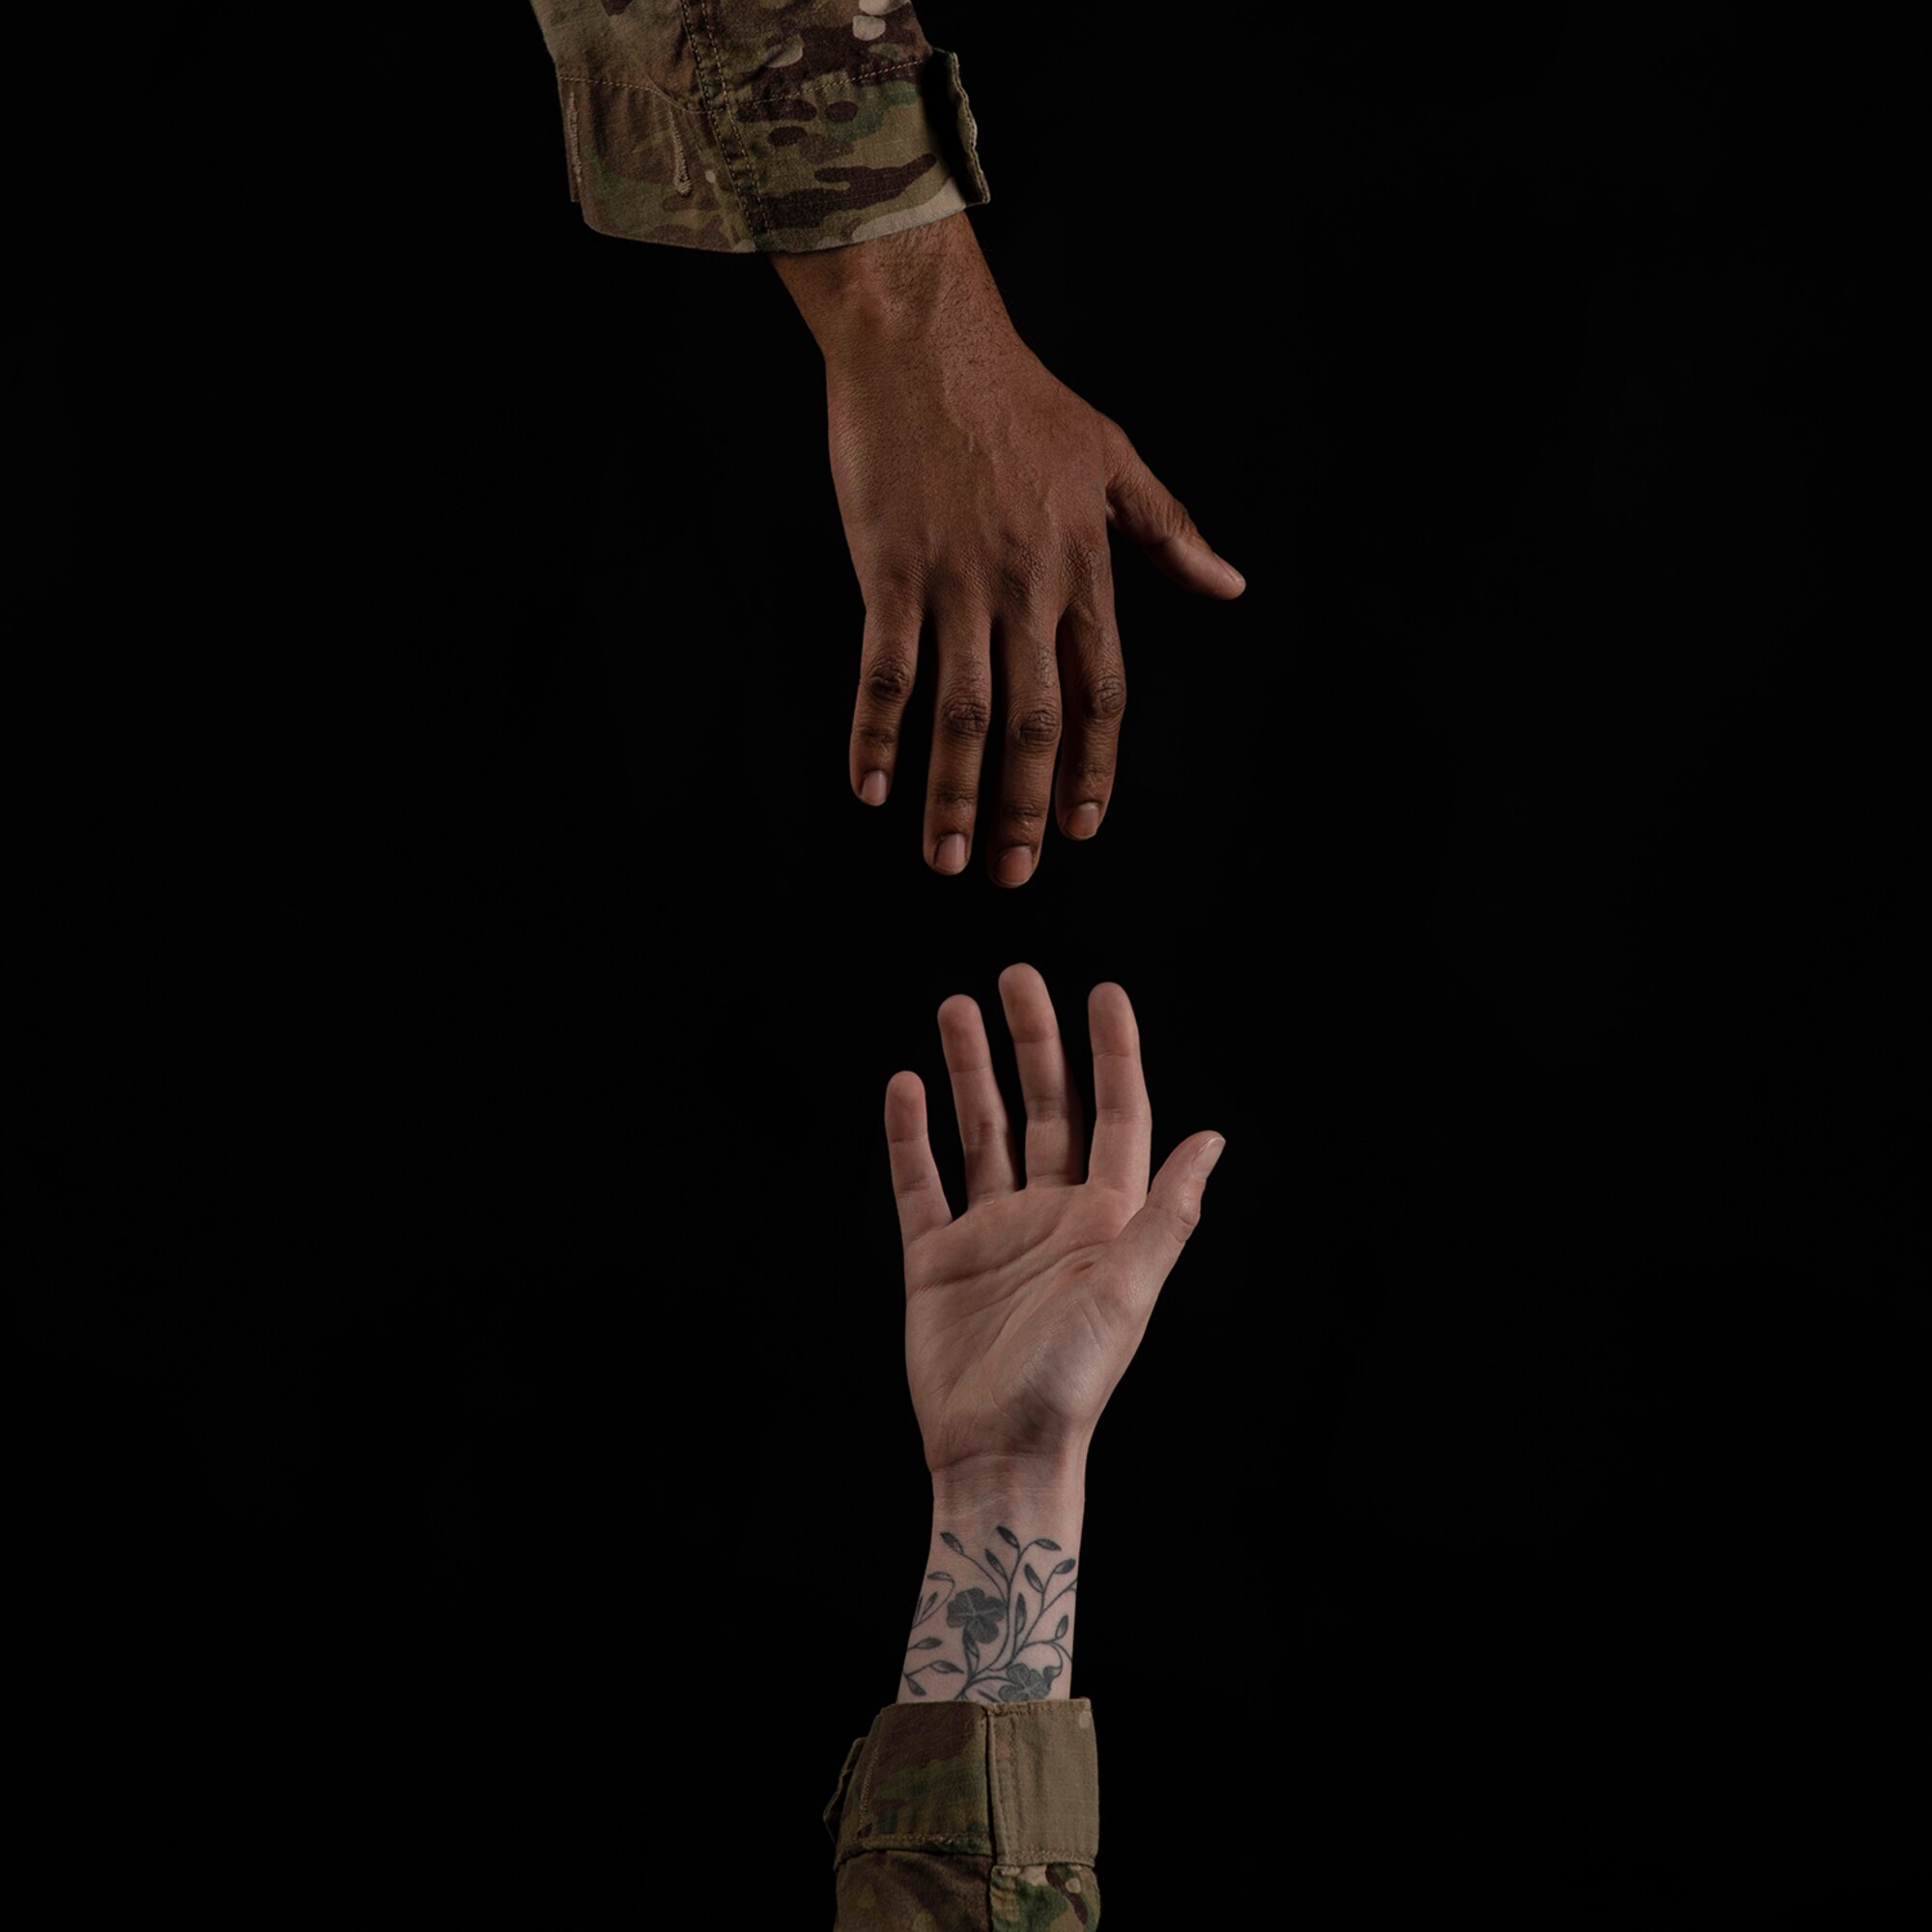 Help spread the word that help is out there and that healing is possible. For more information, call the SAPR office at 302-677-3680 or 302-363-7272. (U.S. Air Force photo by Mauricio Campino)